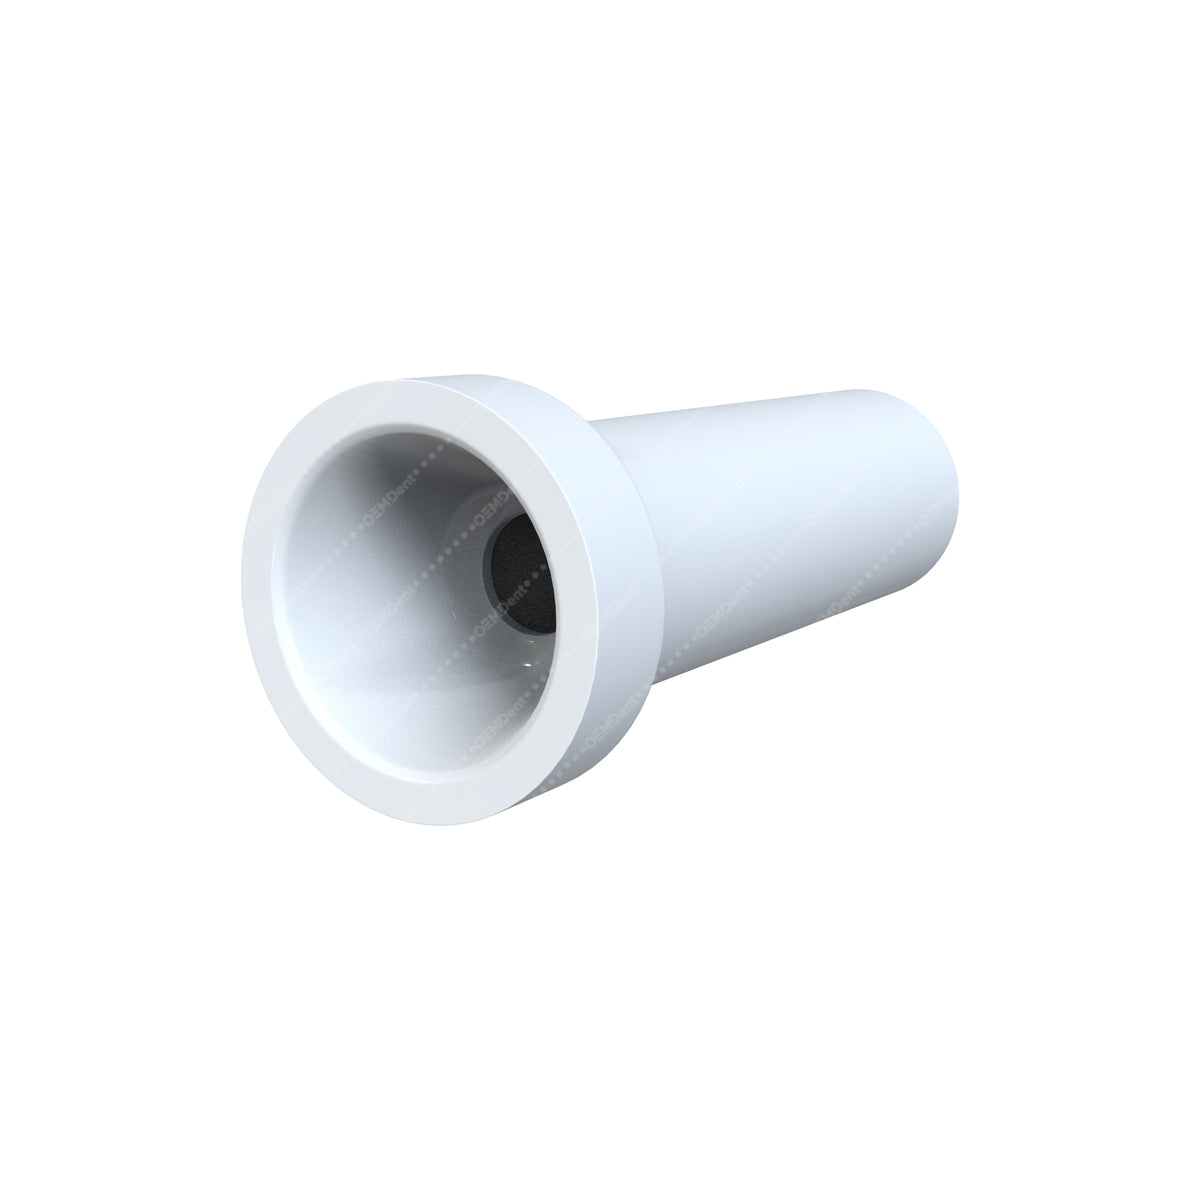 Plastic Sleeve For Multi Unit Abutment - GDT Implants® Internal Hex Compatible - Rear